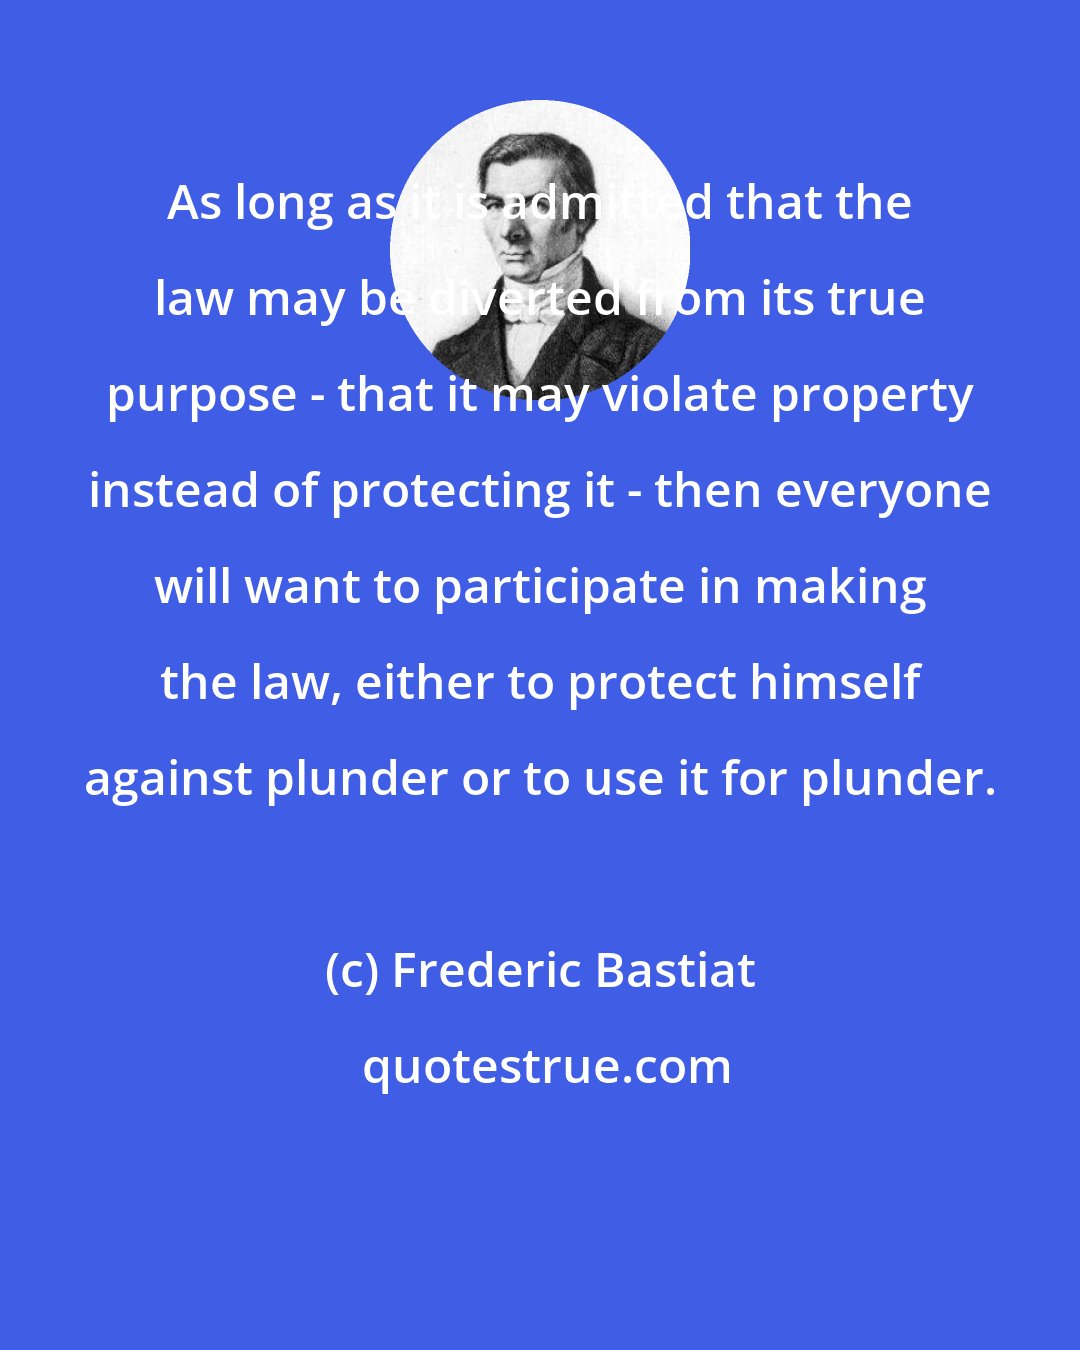 Frederic Bastiat: As long as it is admitted that the law may be diverted from its true purpose - that it may violate property instead of protecting it - then everyone will want to participate in making the law, either to protect himself against plunder or to use it for plunder.